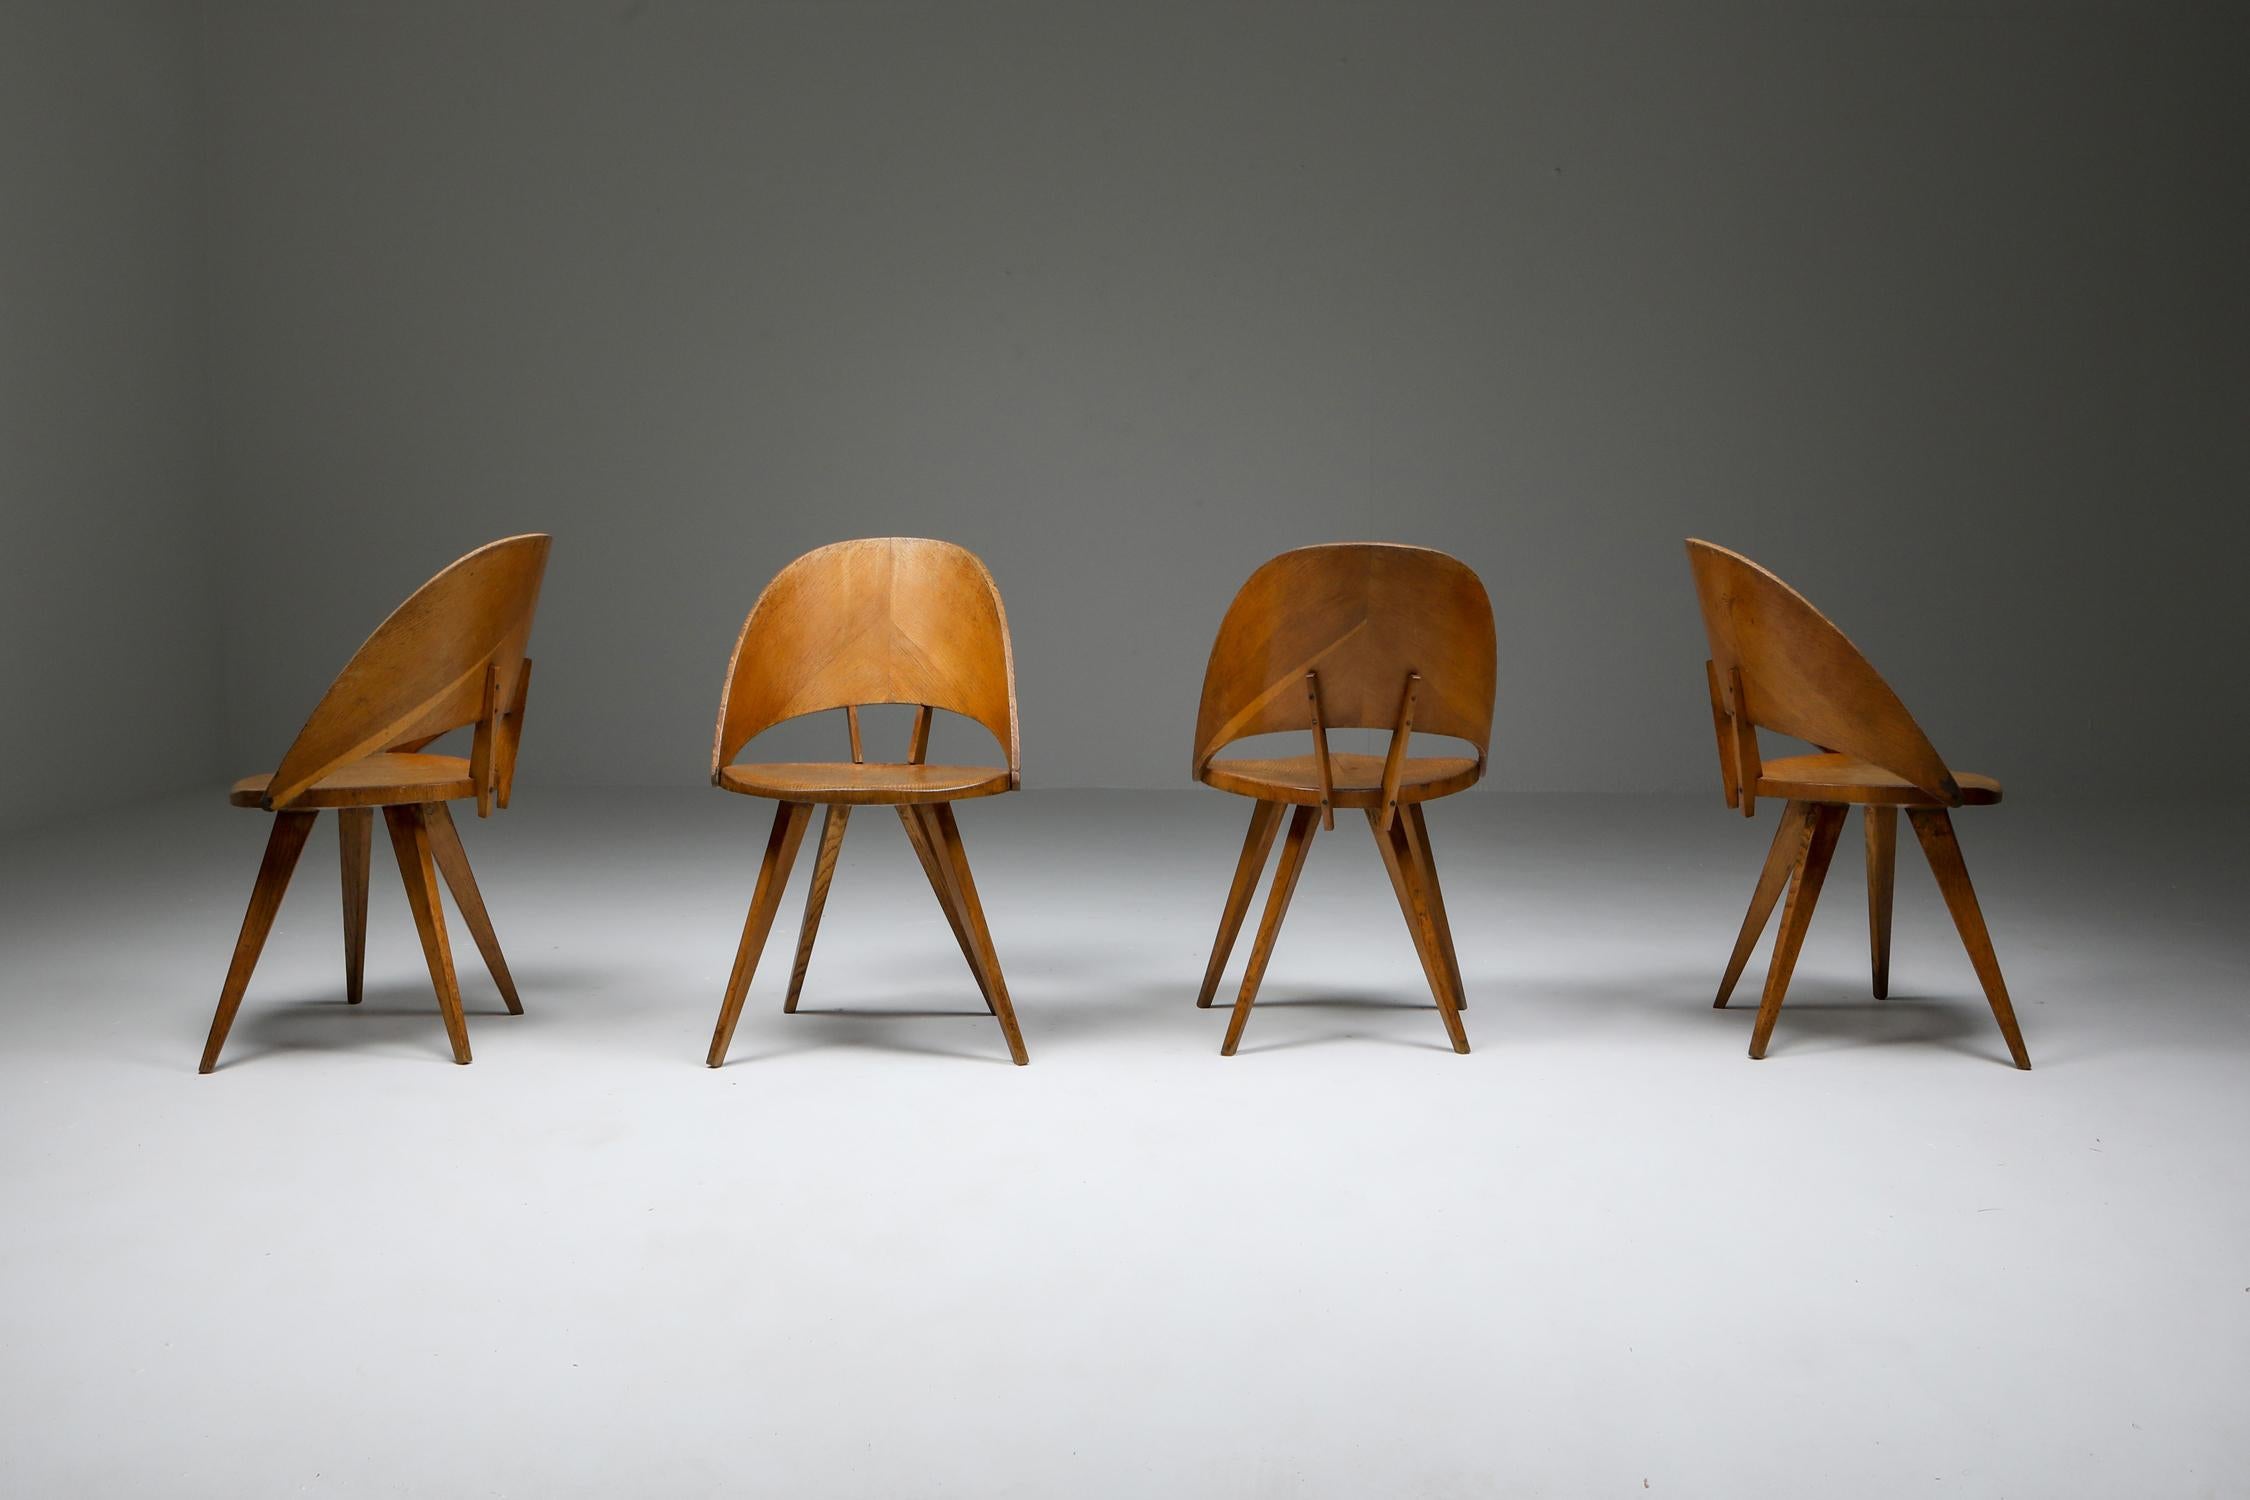 Mid-20th Century Italian Plywood Dining Chairs, 1940s For Sale